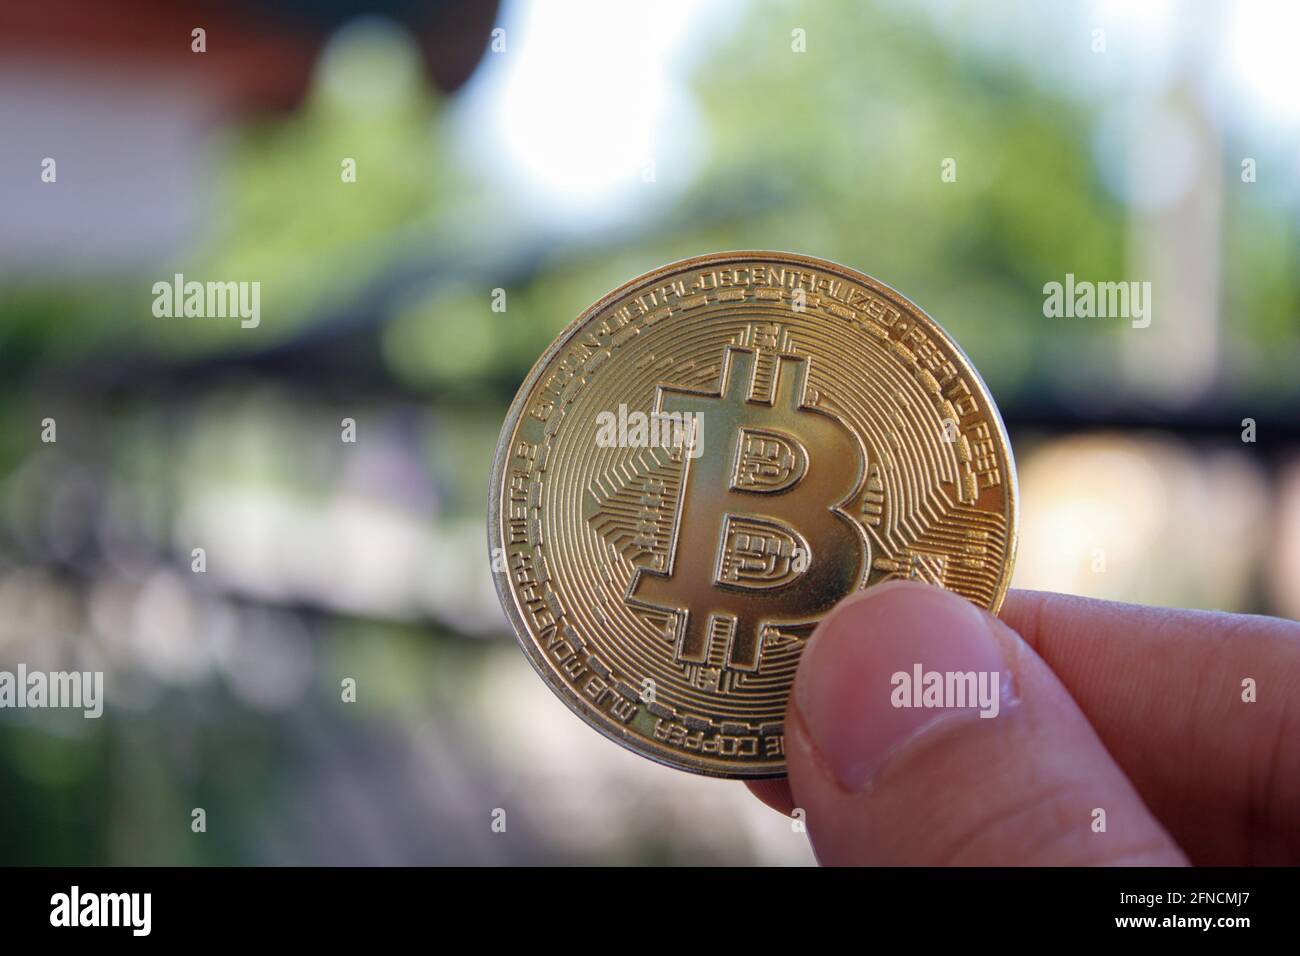 Close-up virtual bitcoin coin in hand. Man hand holding golden btc coin. Bitcoin is popular cryptocurrency. Stock Photo